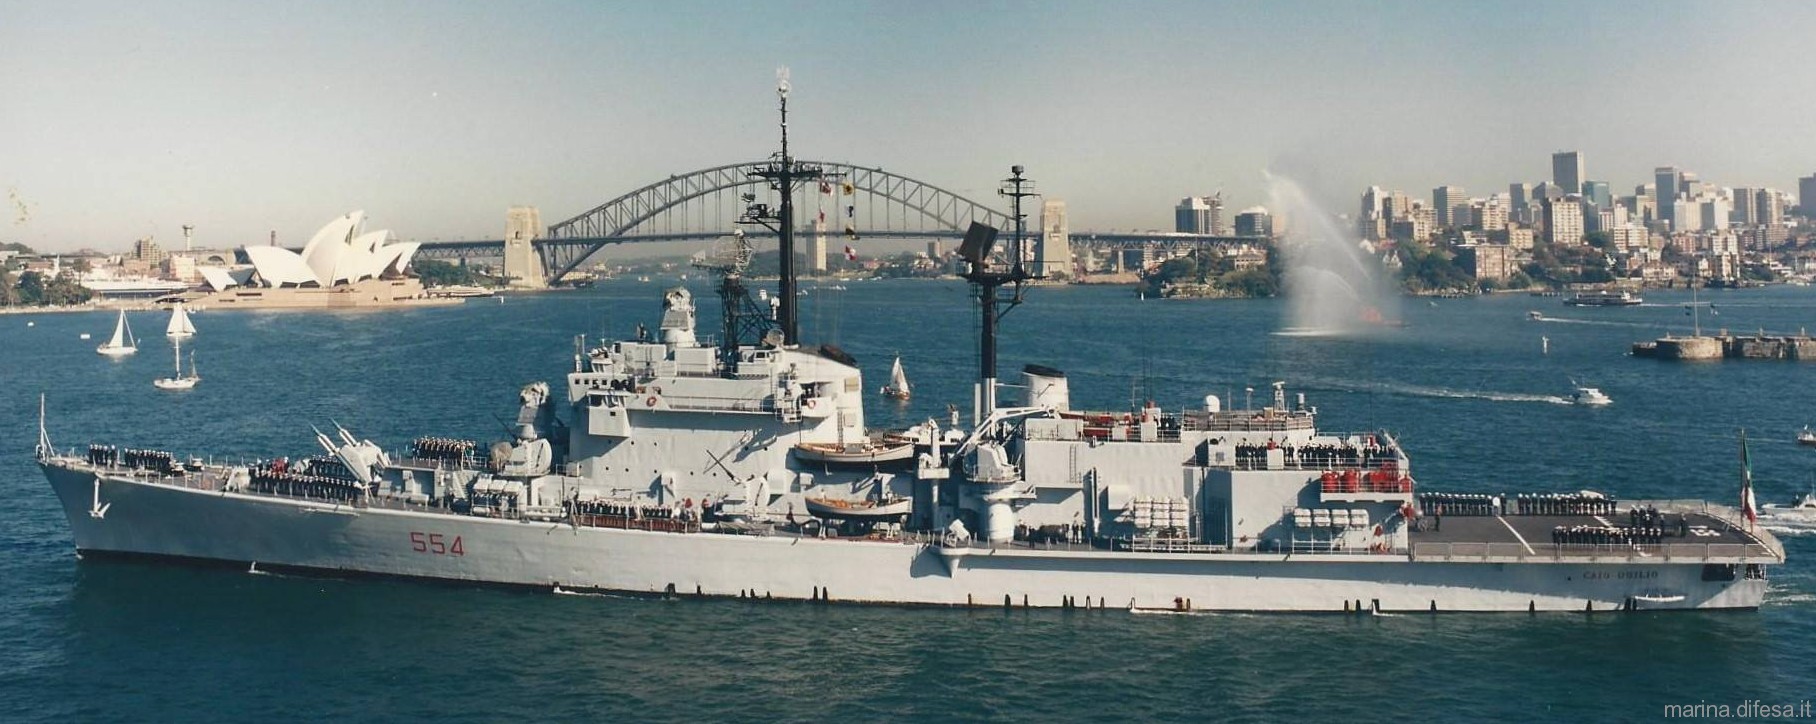 c-554 caio duilio guided missile helicopter cruiser italian navy andrea doria class 05 sydney